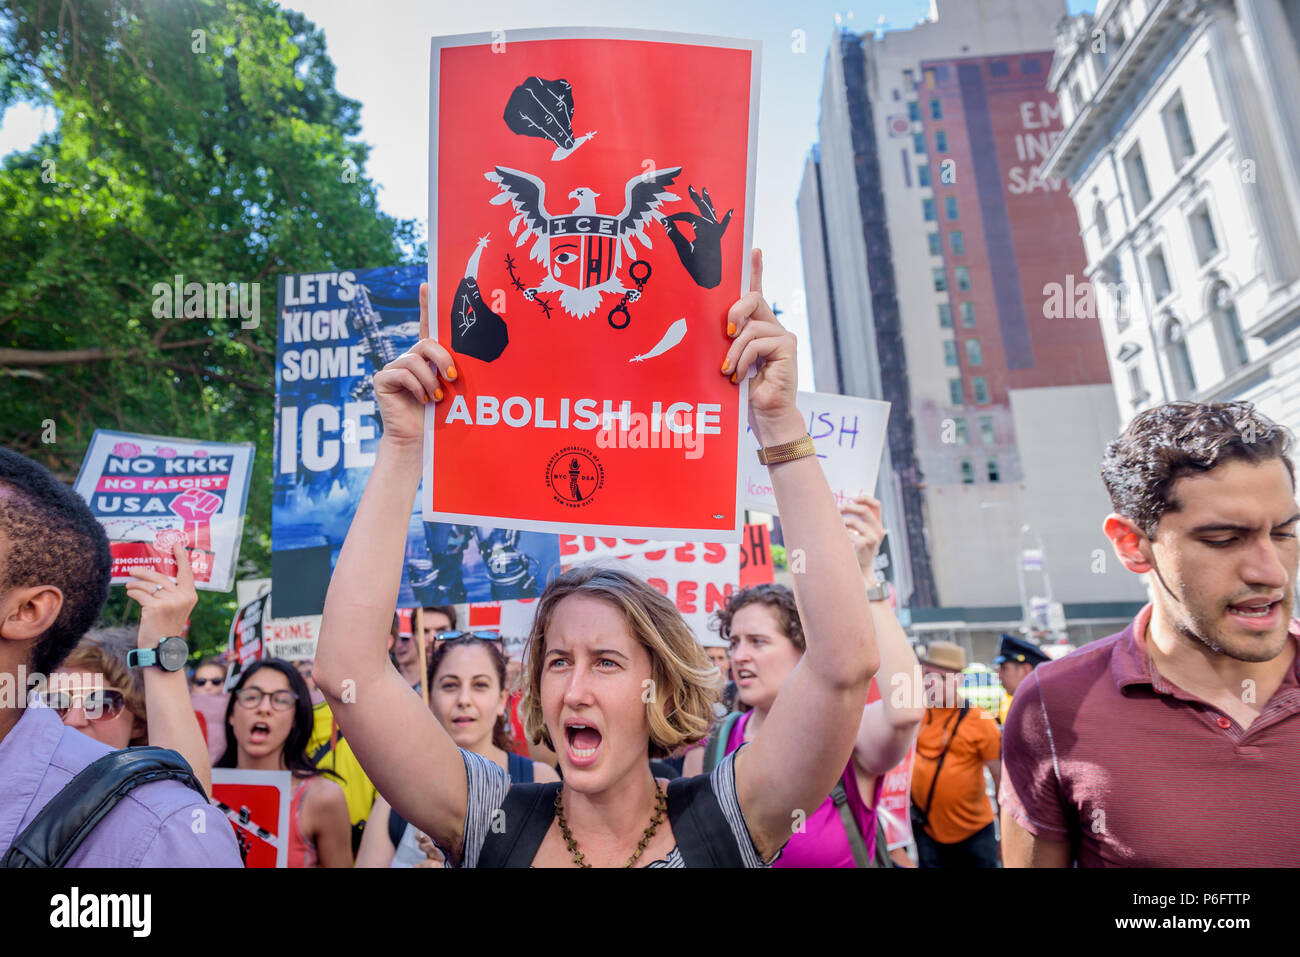 New York, United States. 29th June, 2018. The NYC Democratic Socialists of America organized the march to #AbolishICE on Friday June 29, 2018. The march began at City Hall, walk past the Attorney General's Office, and end at 26 Federal Plaza-the site of ICE's Enforcement Removal Operations Office. Credit: Erik McGregor/Pacific Press/Alamy Live News Stock Photo